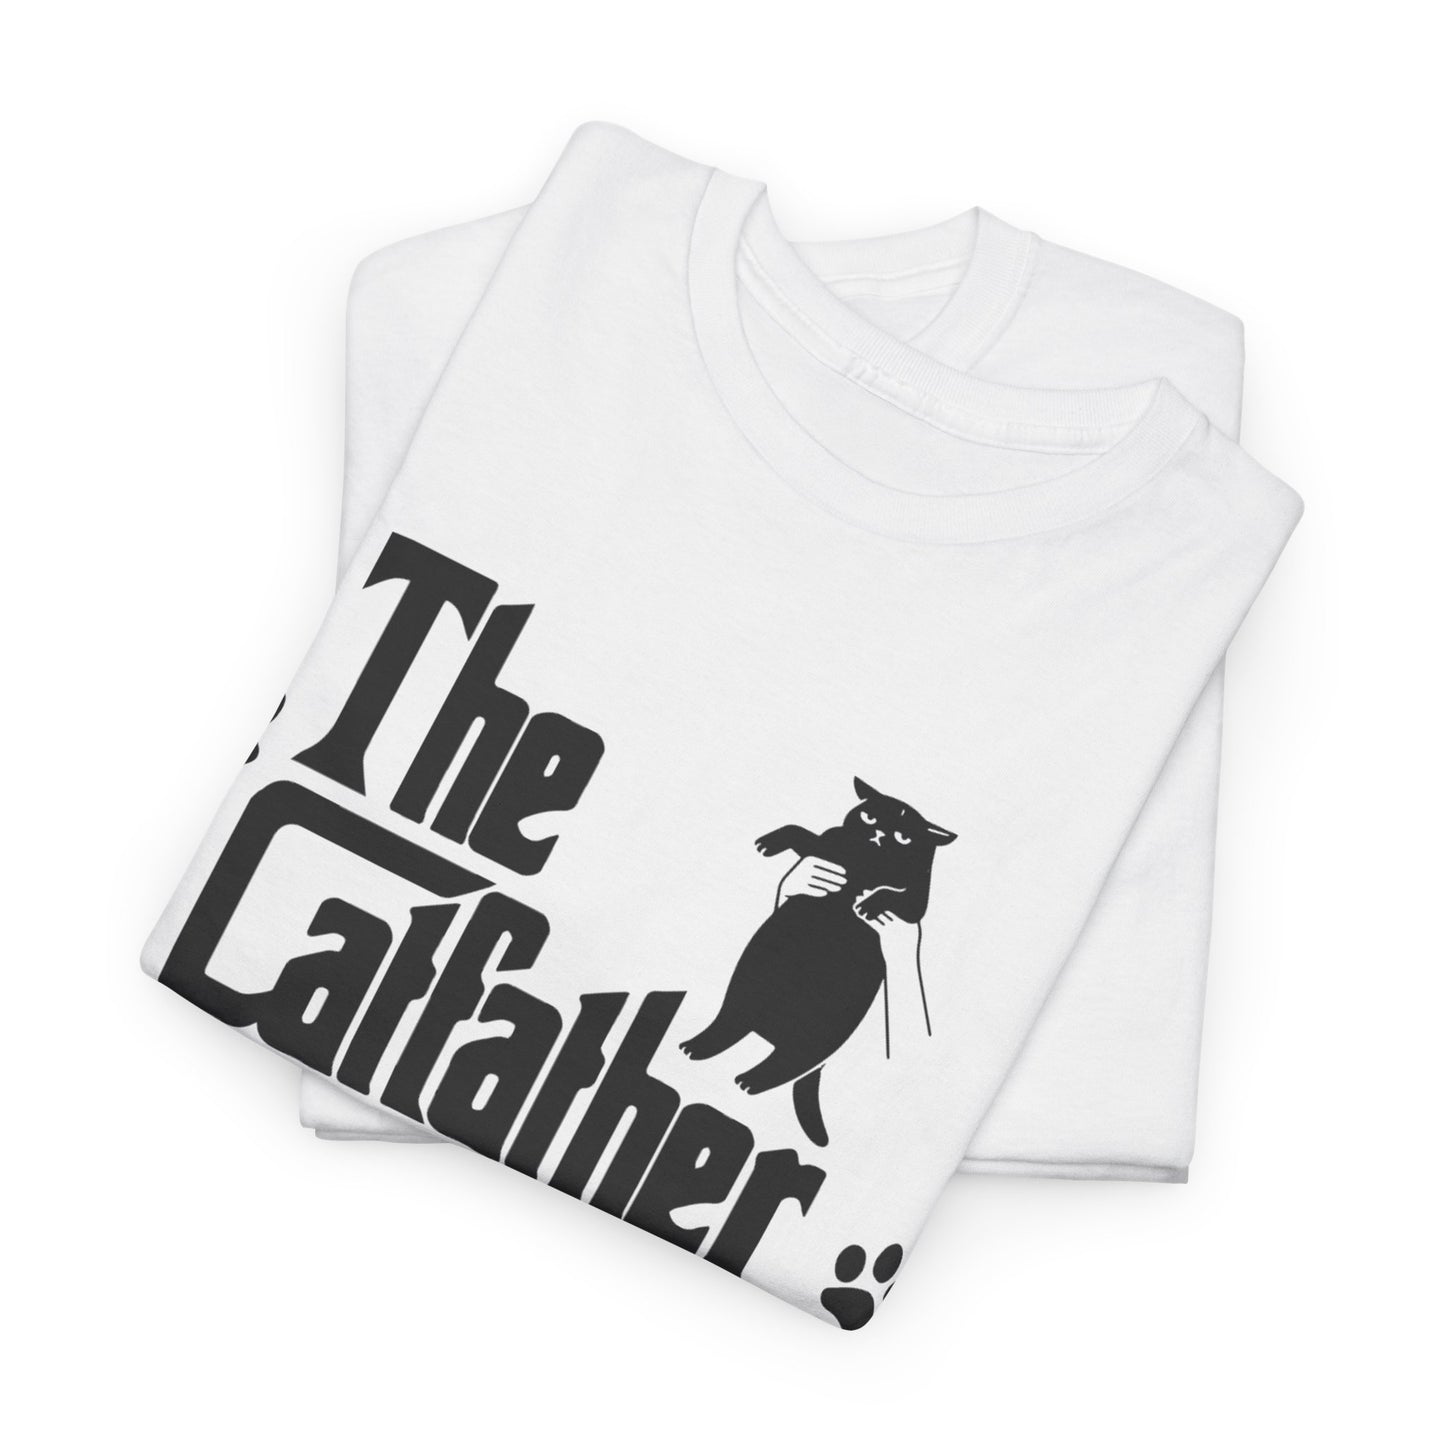 The cat father  Cotton Tee